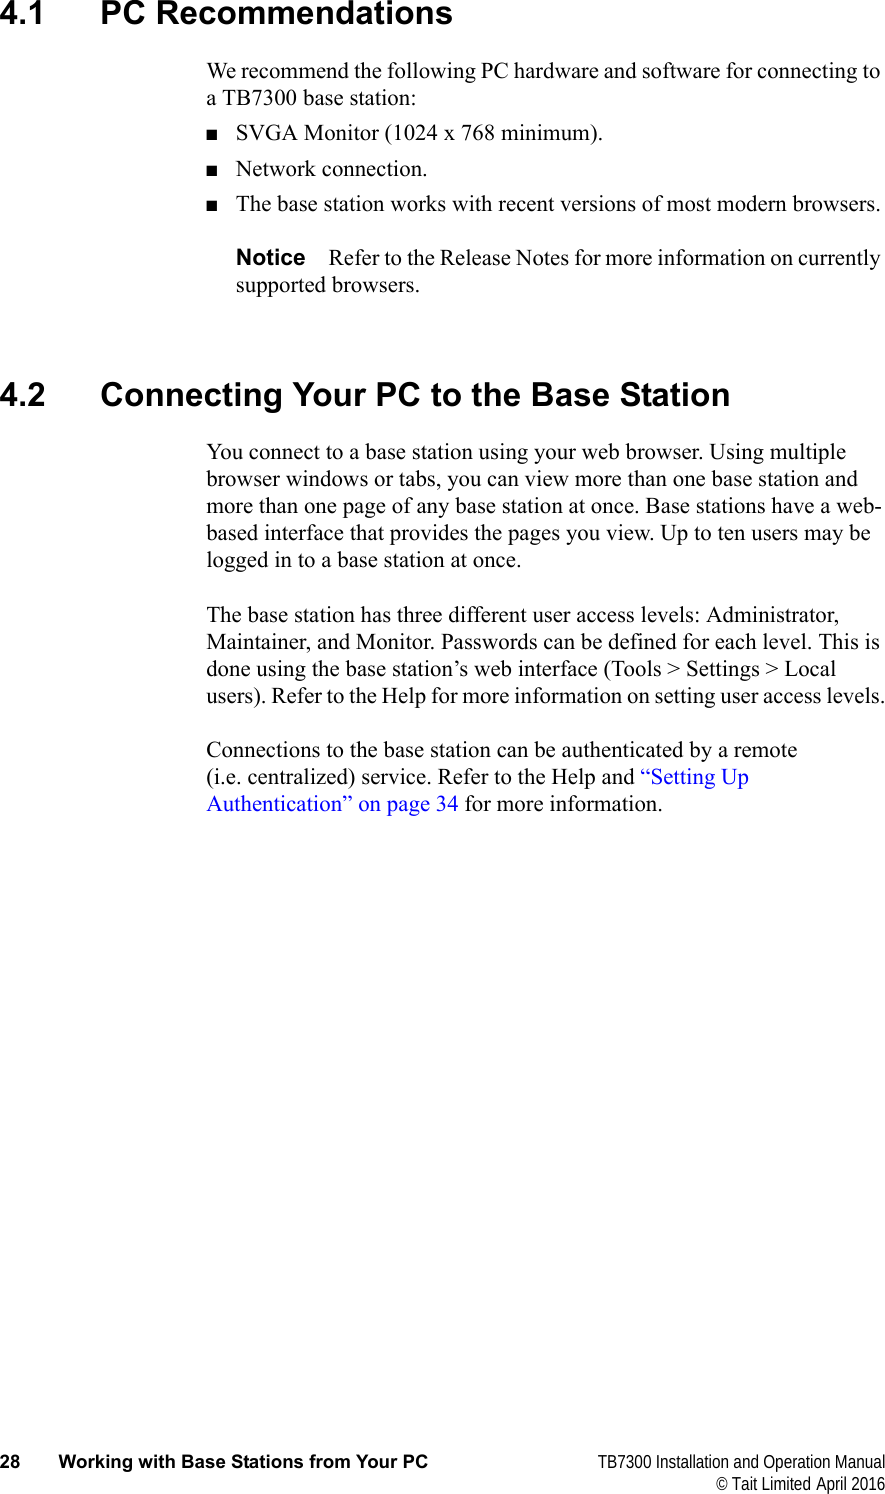  28 Working with Base Stations from Your PC TB7300 Installation and Operation Manual© Tait Limited April 20164.1 PC RecommendationsWe recommend the following PC hardware and software for connecting to a TB7300 base station:■SVGA Monitor (1024 x 768 minimum).■Network connection.■The base station works with recent versions of most modern browsers.Notice Refer to the Release Notes for more information on currently supported browsers. 4.2 Connecting Your PC to the Base StationYou connect to a base station using your web browser. Using multiple browser windows or tabs, you can view more than one base station and more than one page of any base station at once. Base stations have a web-based interface that provides the pages you view. Up to ten users may be logged in to a base station at once.The base station has three different user access levels: Administrator, Maintainer, and Monitor. Passwords can be defined for each level. This is done using the base station’s web interface (Tools &gt; Settings &gt; Local users). Refer to the Help for more information on setting user access levels.Connections to the base station can be authenticated by a remote (i.e. centralized) service. Refer to the Help and “Setting Up Authentication” on page 34 for more information.